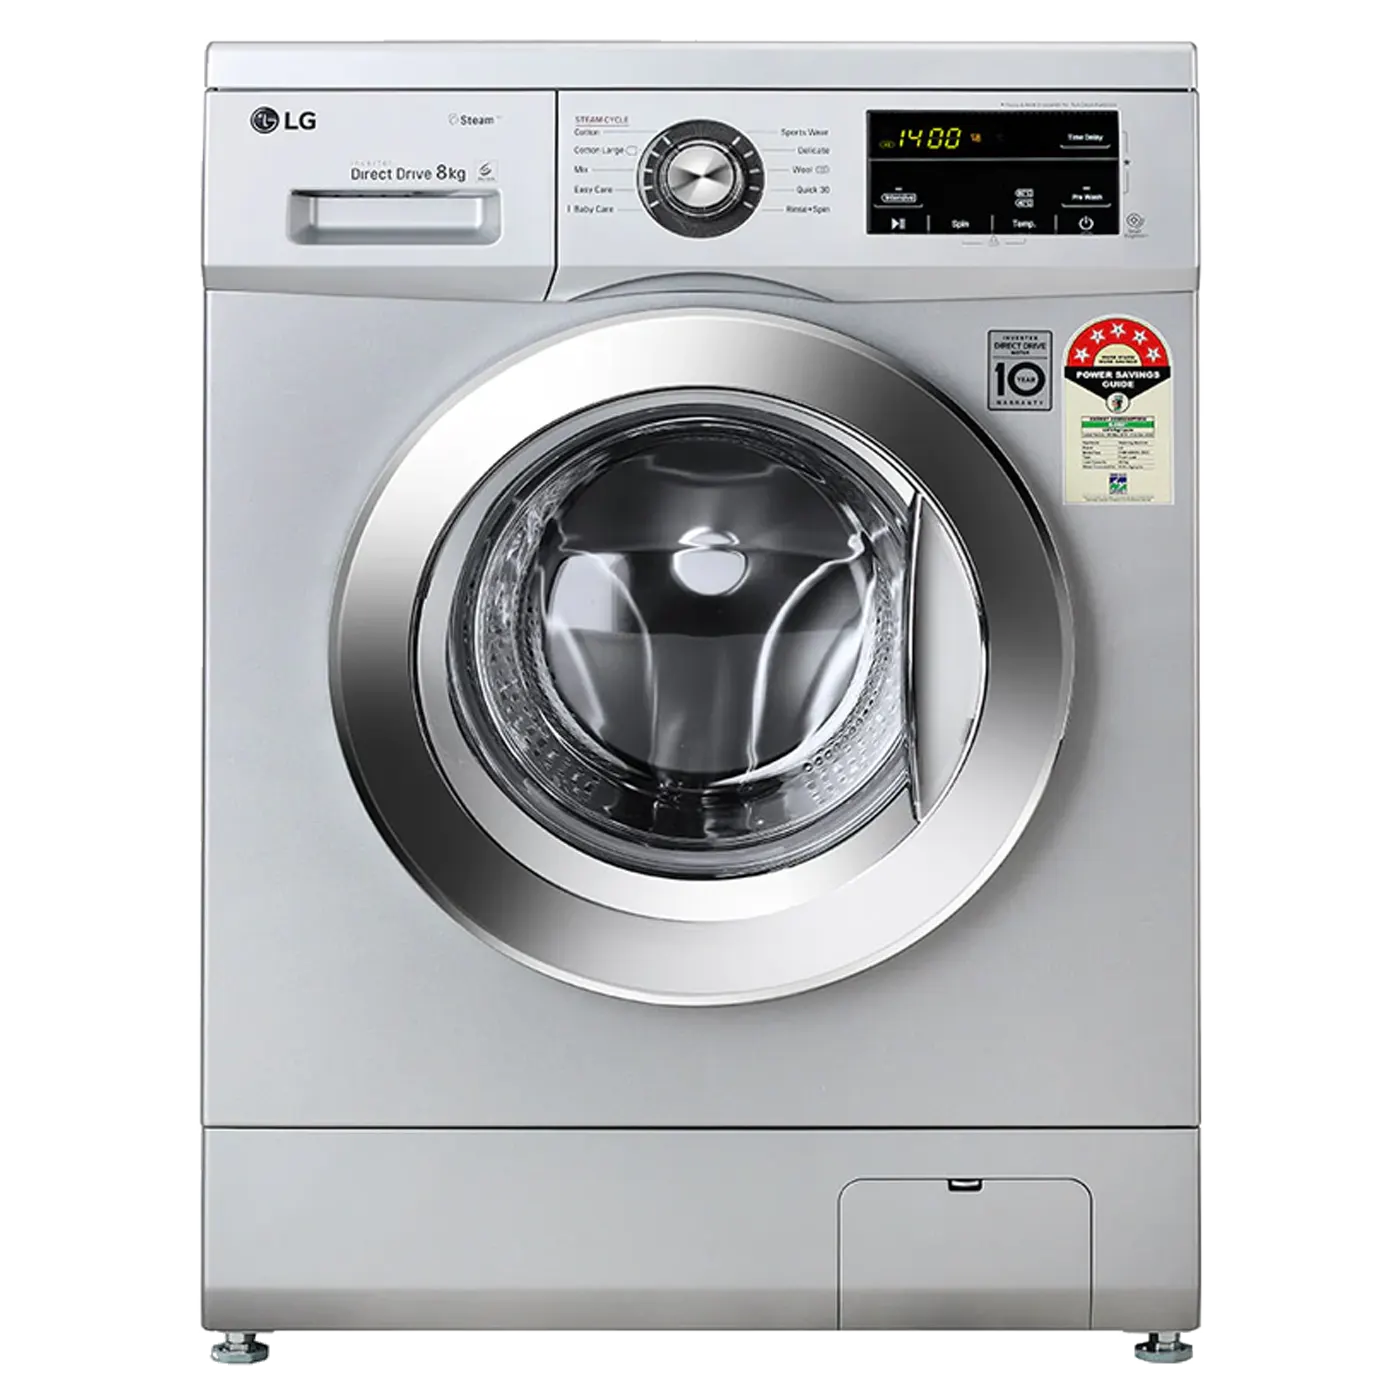 LG - 8.0 Kg 5 Star Inverter Touch Control Fully-Automatic Front Load Washing Machine with Heater(FHM1408BDL, Silver, 6 Motion Direct Drive)